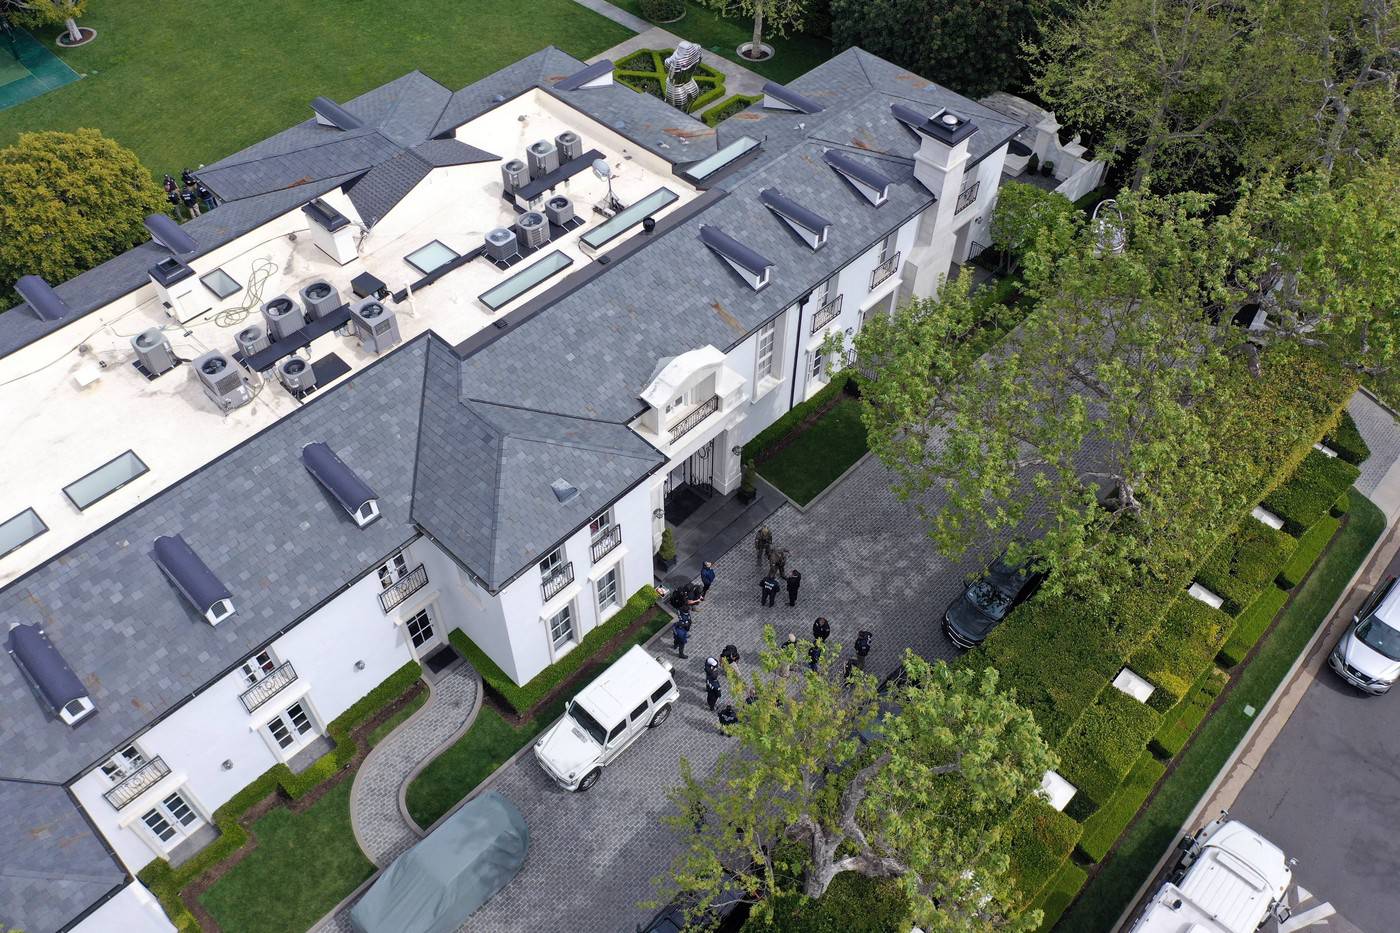 Federal agents raid the mansion of Diddy, aka Sean Combs reportedly in connection to sex trafficking